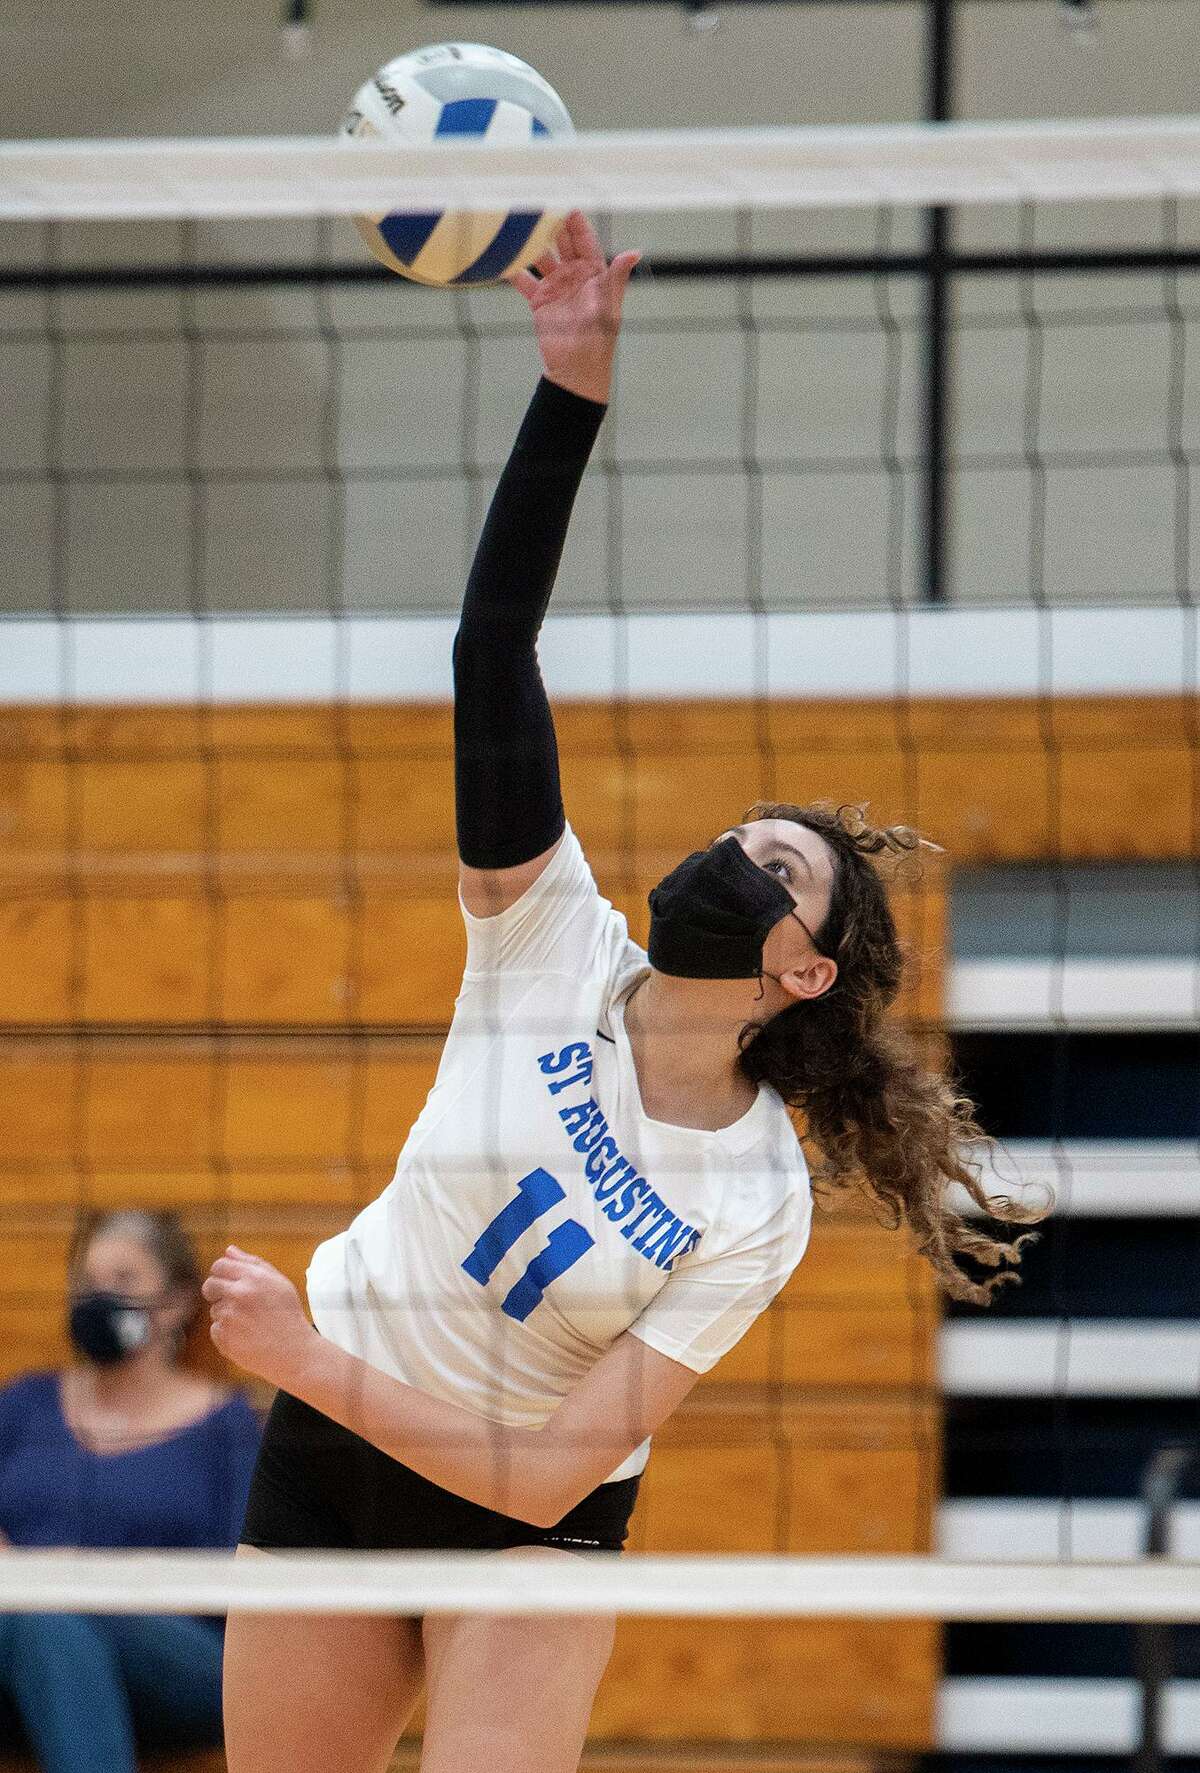 St. Augustine High School Kelly Samano goes for the kill Saturday, Aug. 14, 2021, in a game against San Isidro Valley High School at St. Augustine High School during the during the Marissa Keene M.D. Memorial Volleyball Tournament.